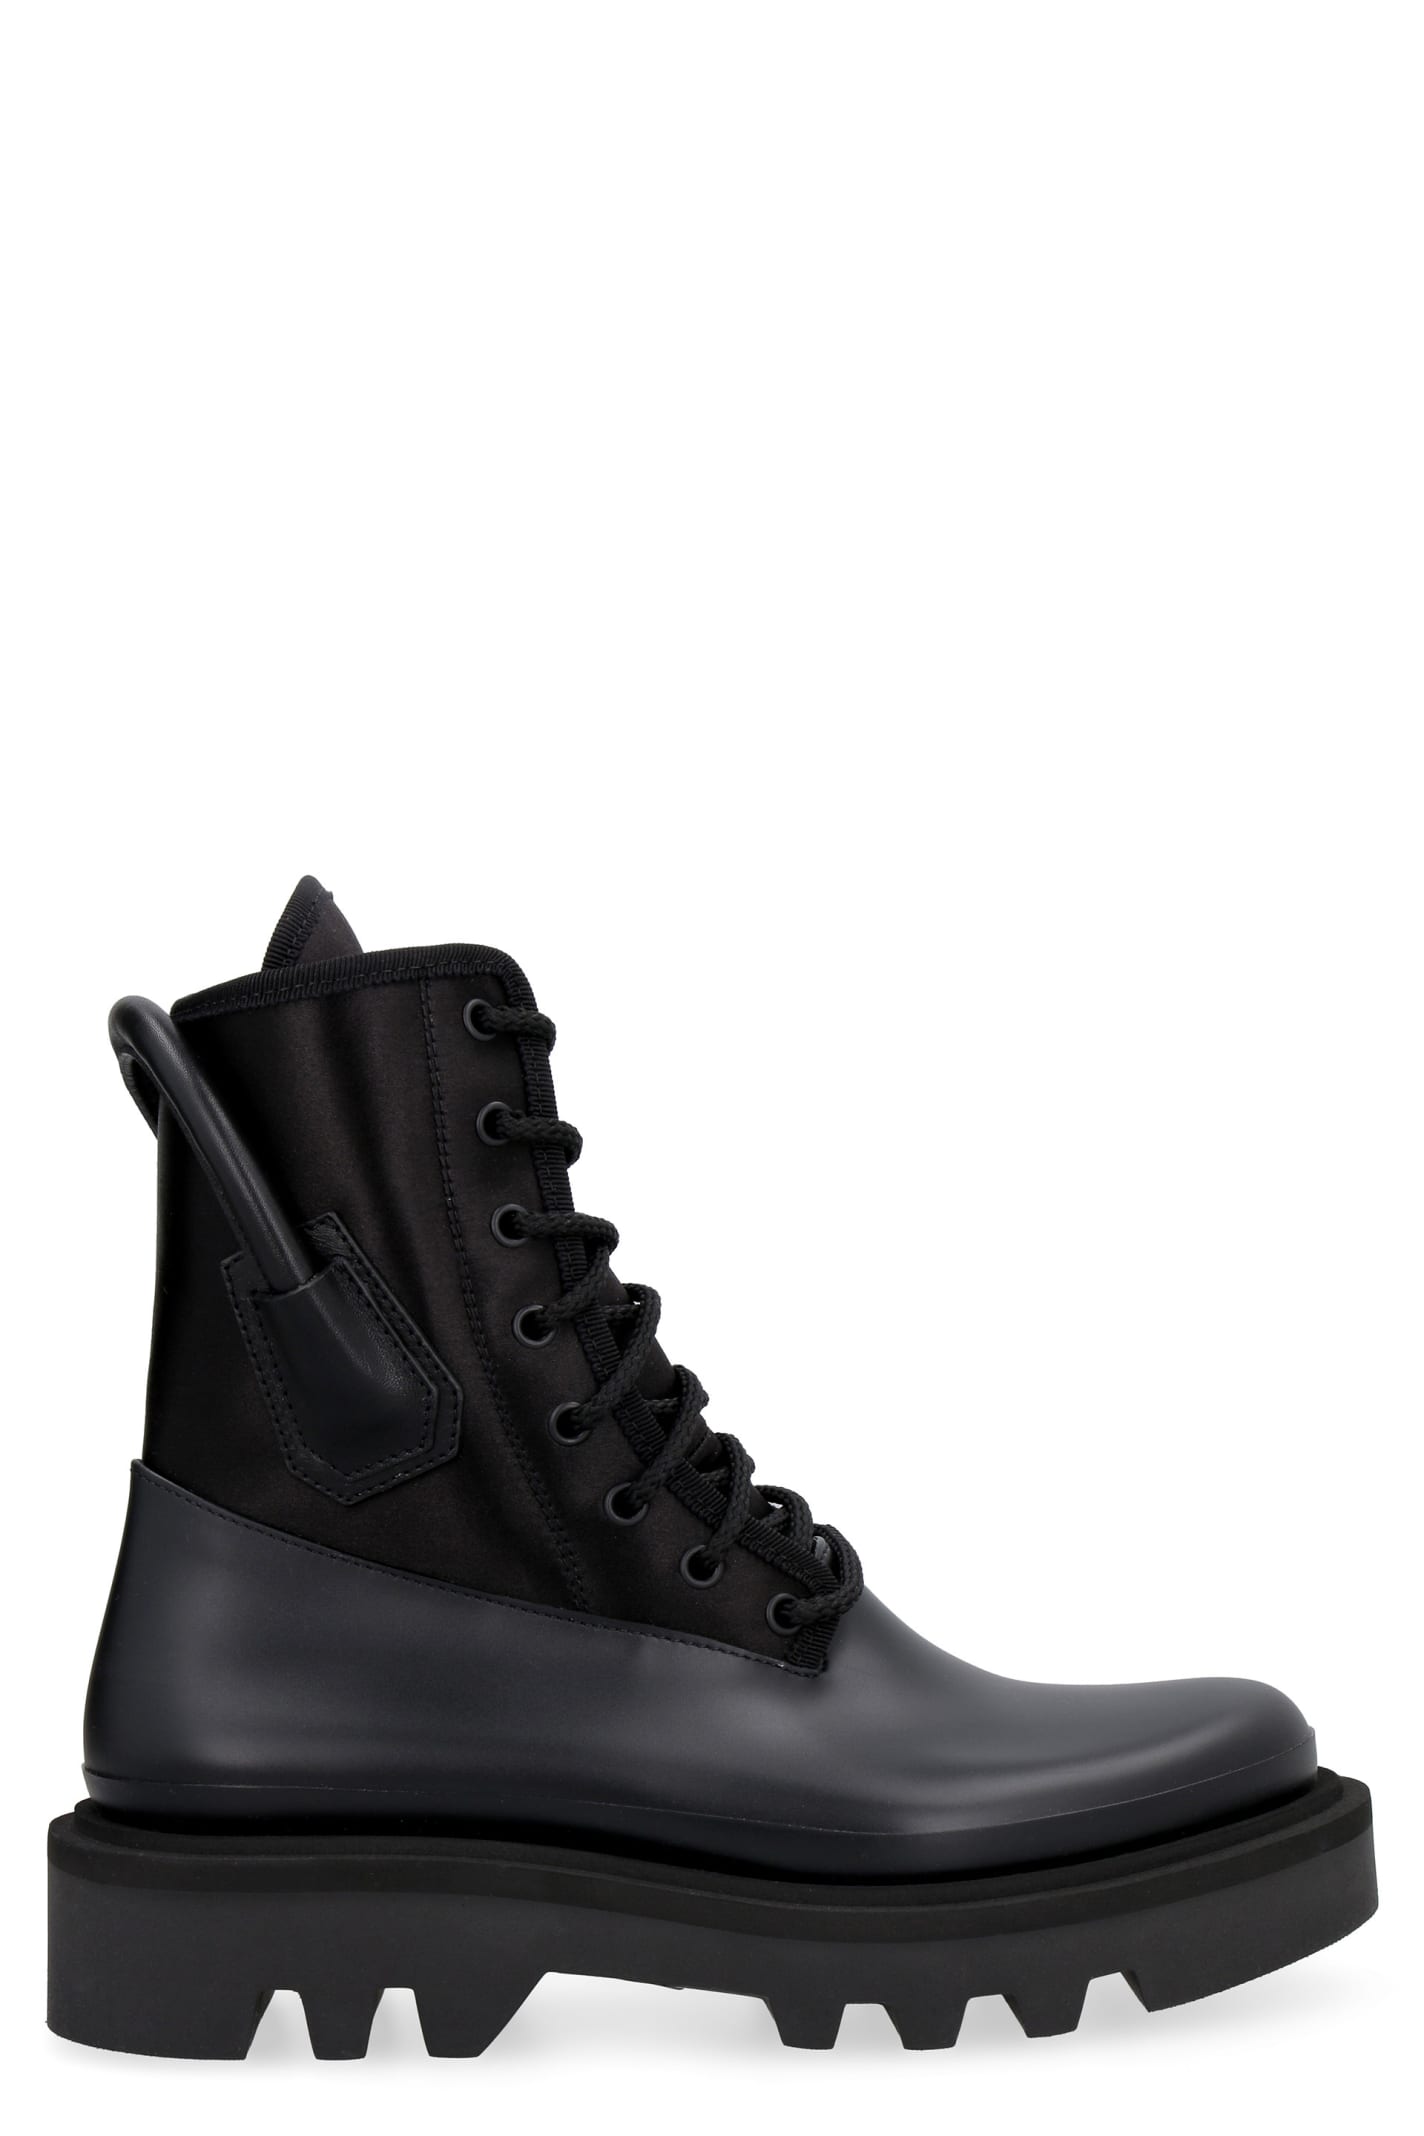 Givenchy Lug-sole Lace-up Boots